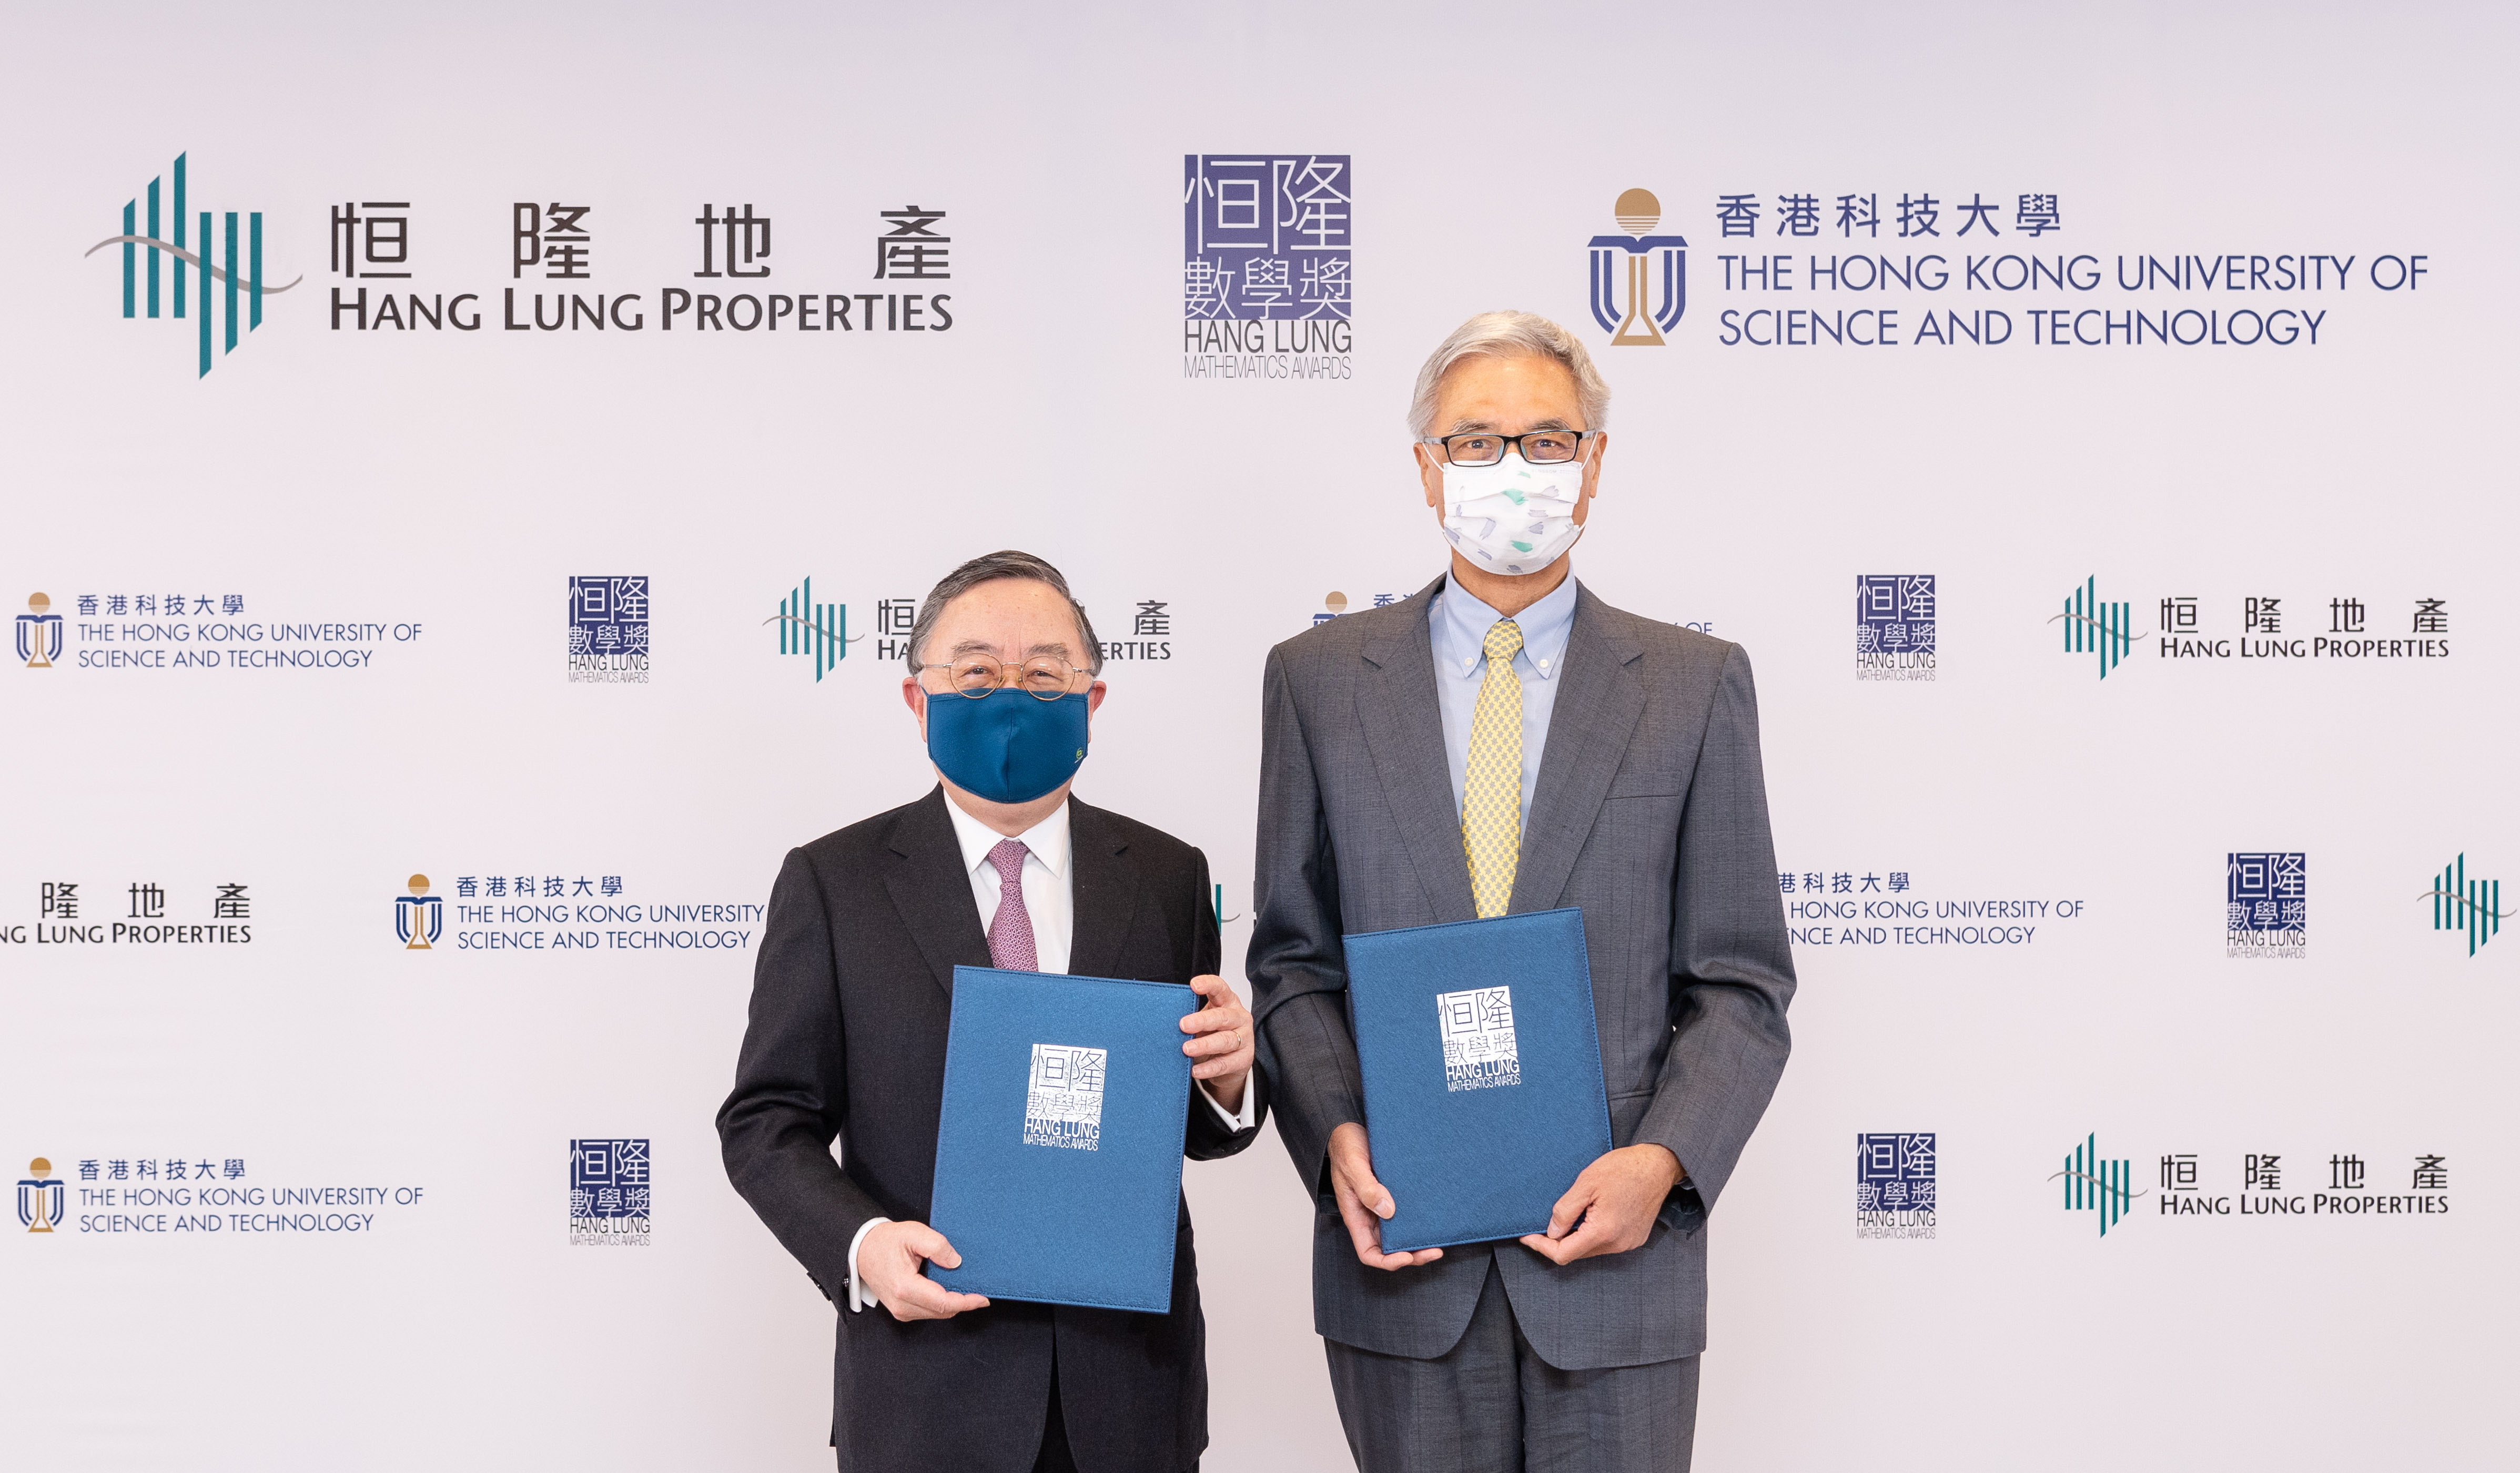 Mr. Ronnie C. CHAN, Chair of Hang Lung Properties, and Professor Wei SHYY, President of HKUST, announcing their partnership to co-organize HLMA and nurture talented young mathematics and science students in Hong Kong